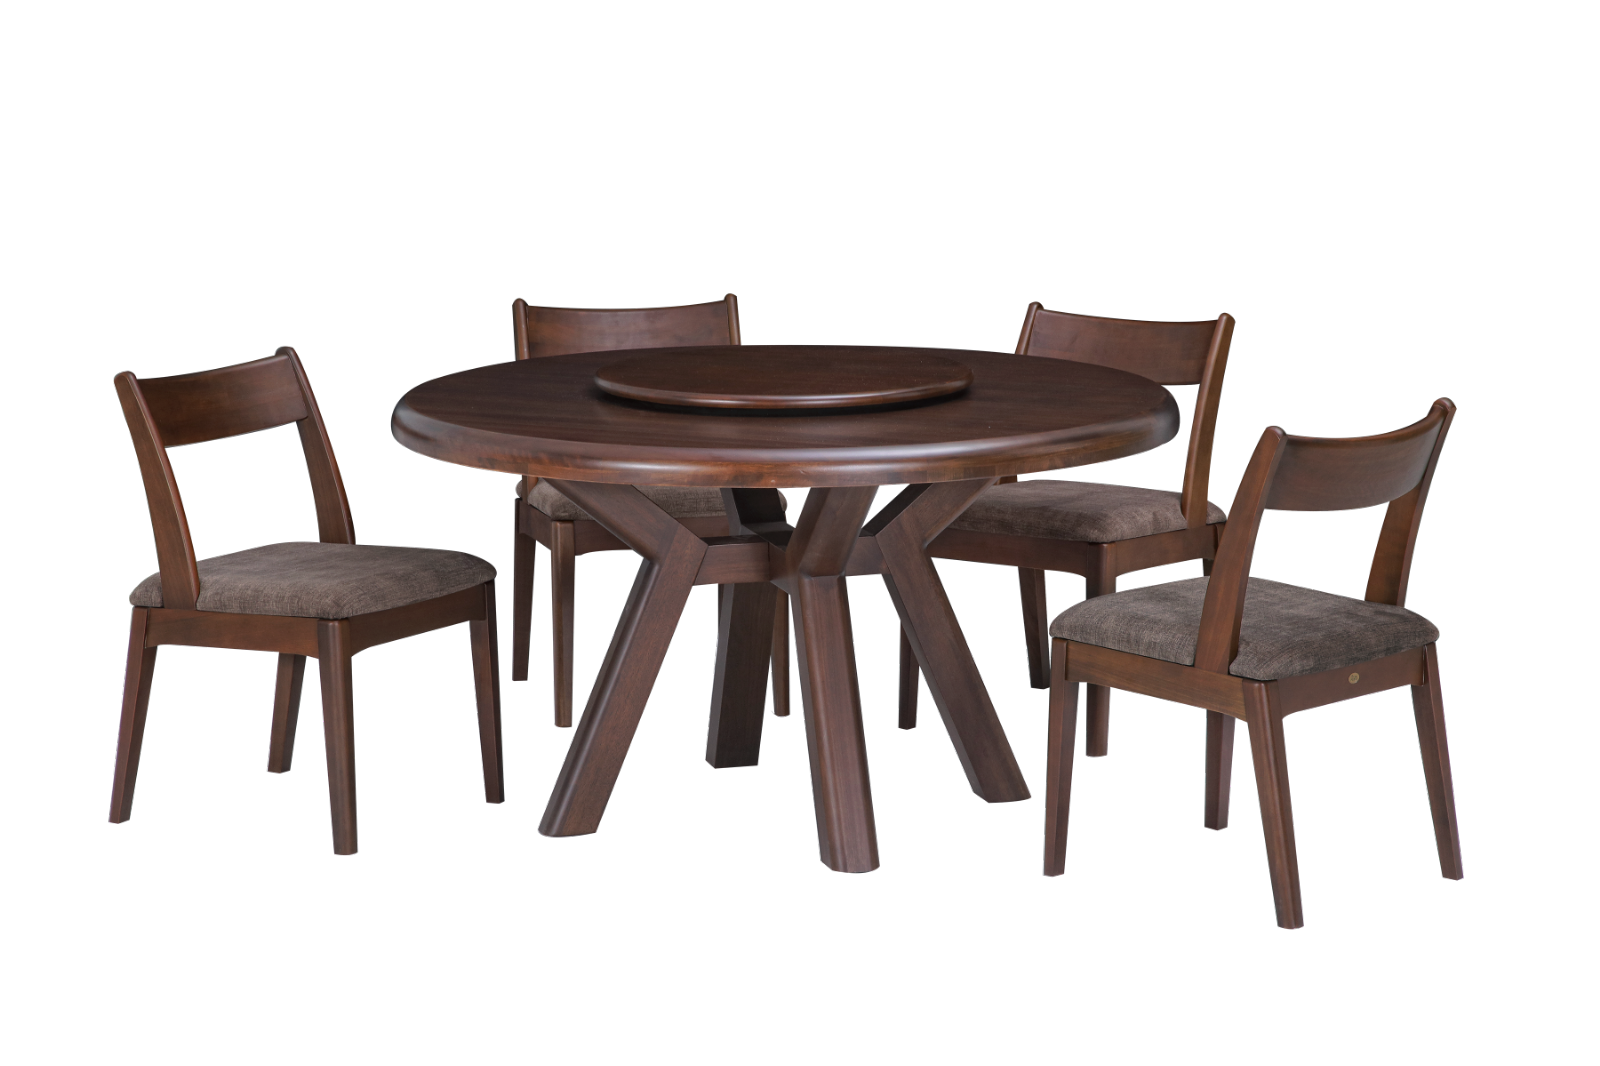 YU Solid Round Dining Table & Summer Cushion Seat Dining Chair